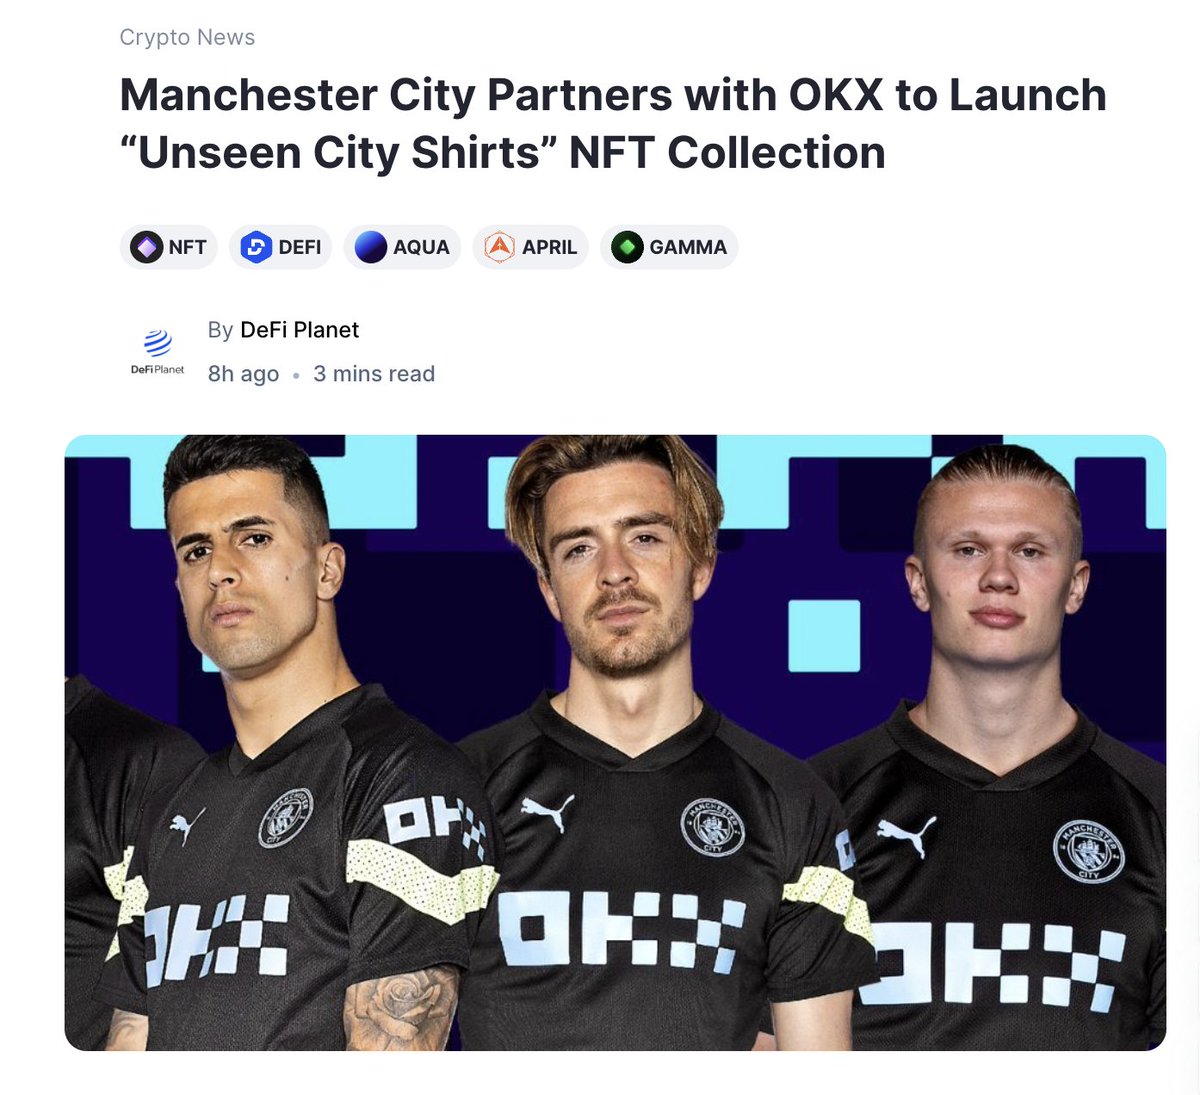 This collab collection with ManCity and @OKX has me hyped!